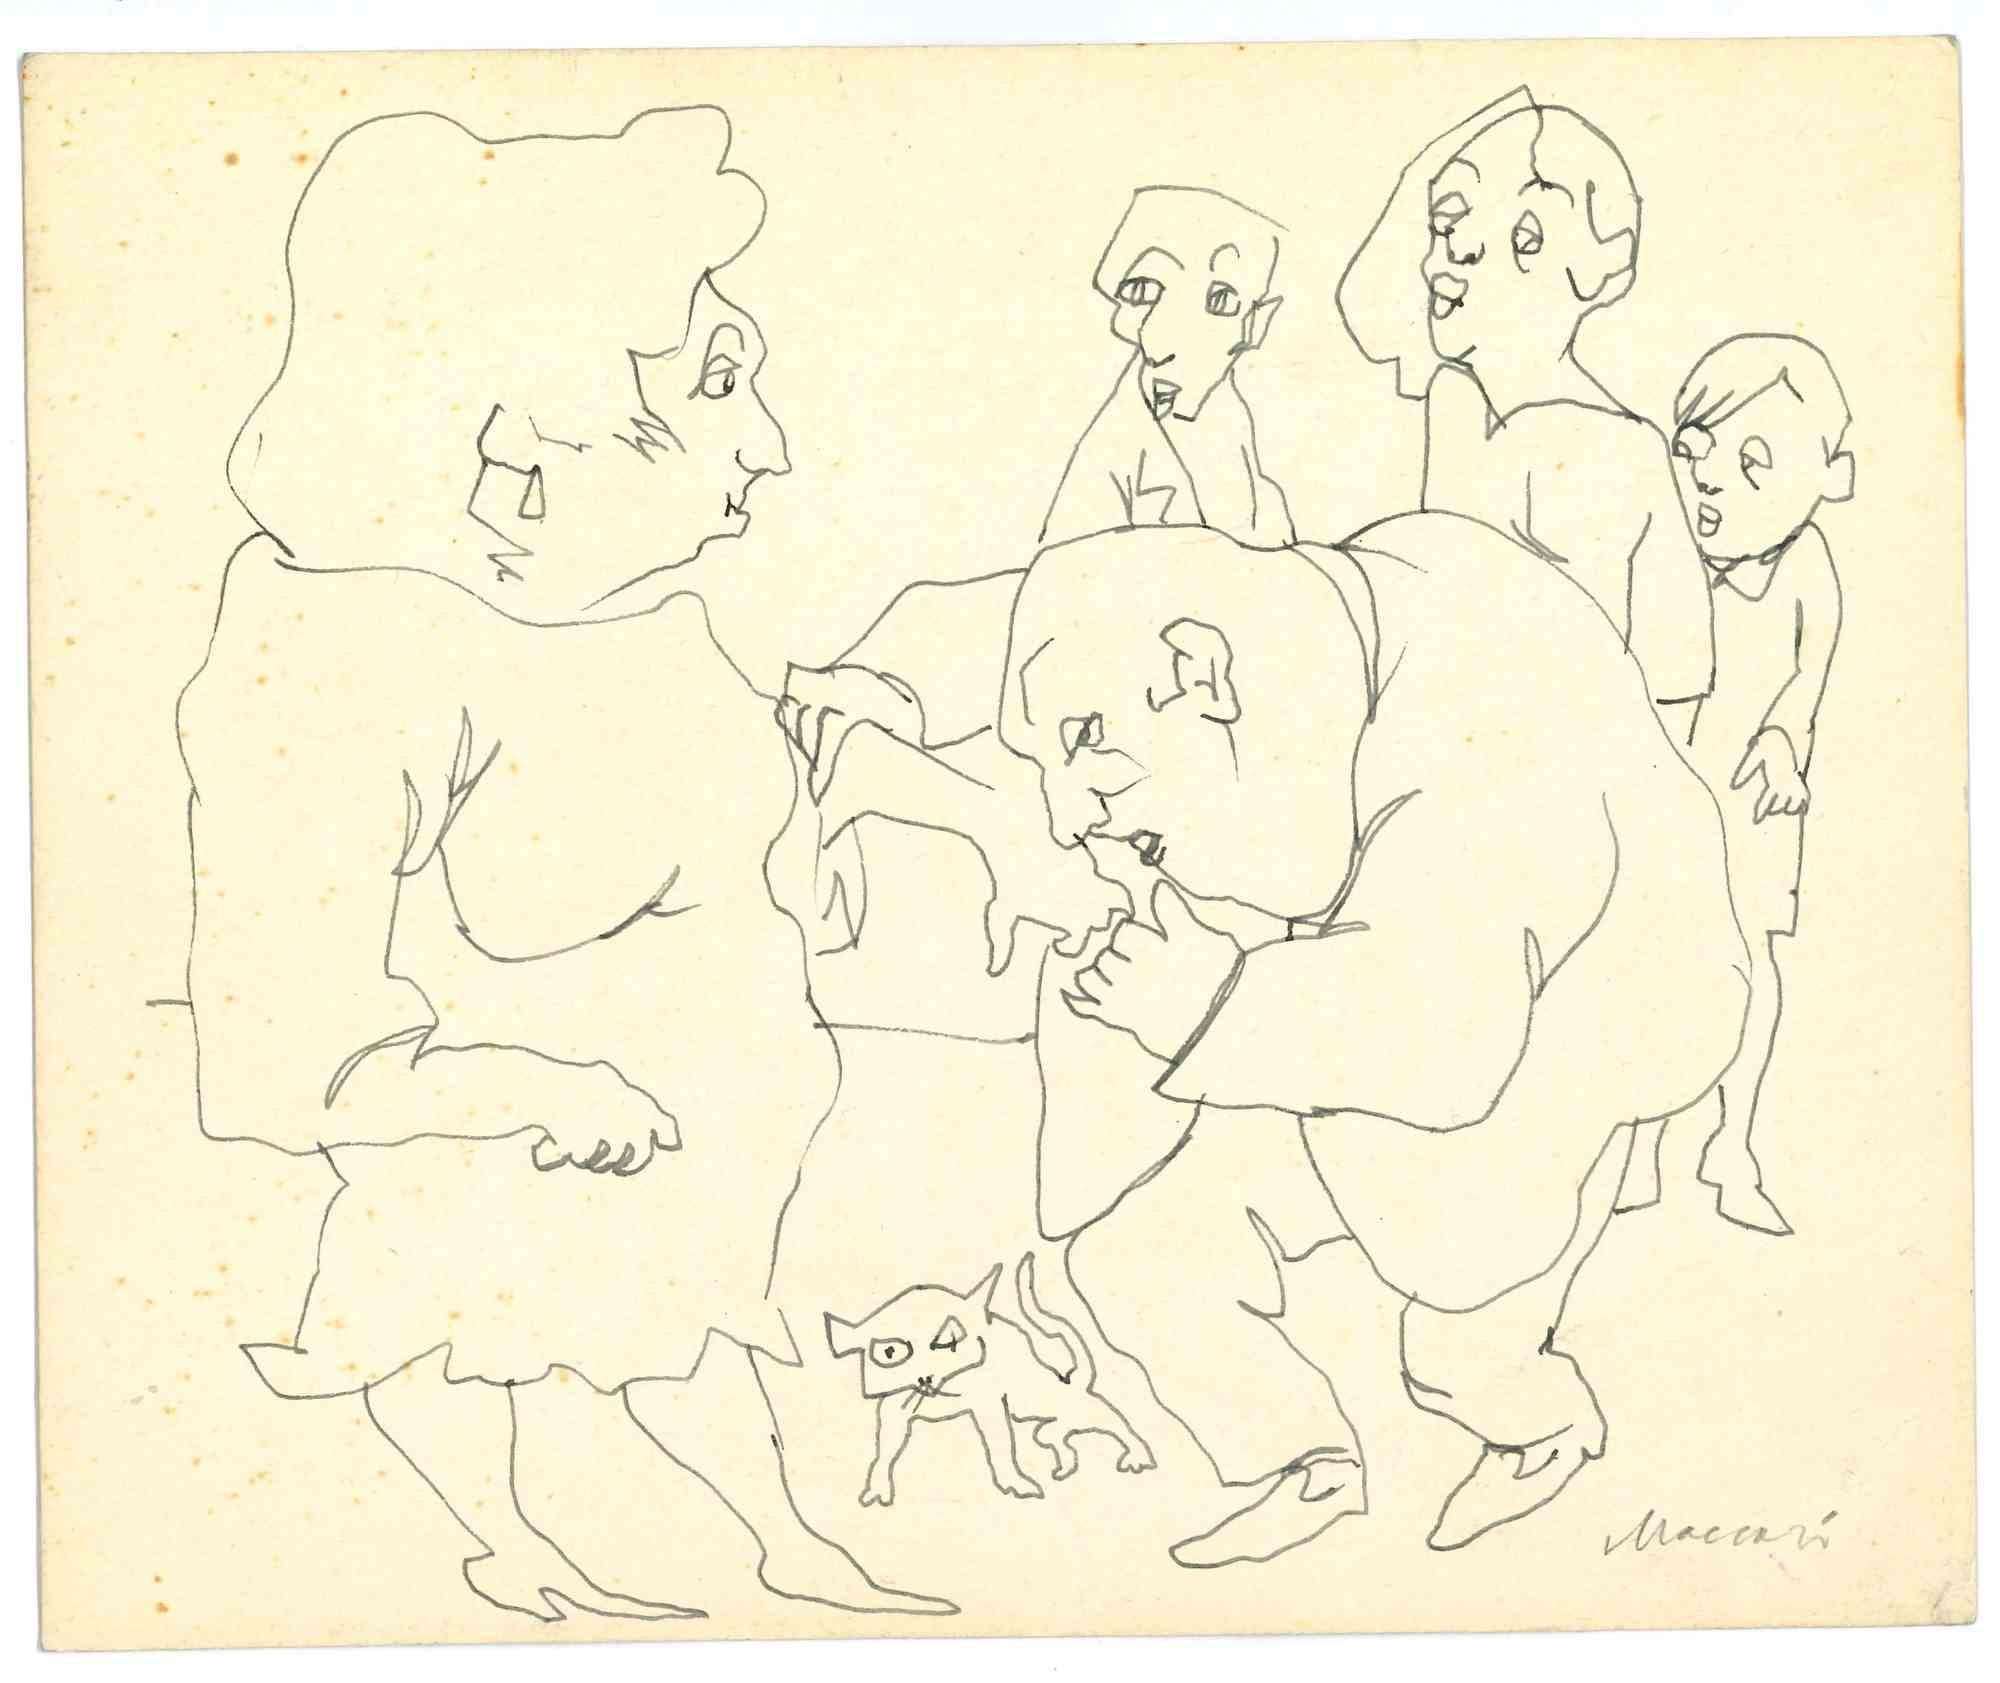 Figures is a china ink drawing realized by Mino Maccari  (1924-1989) in the Mid-20th Century.

Hand-signed.

Good conditions with slight foxing.

Mino Maccari (Siena, 1924-Rome, June 16, 1989) was an Italian writer, painter, engraver and journalist,